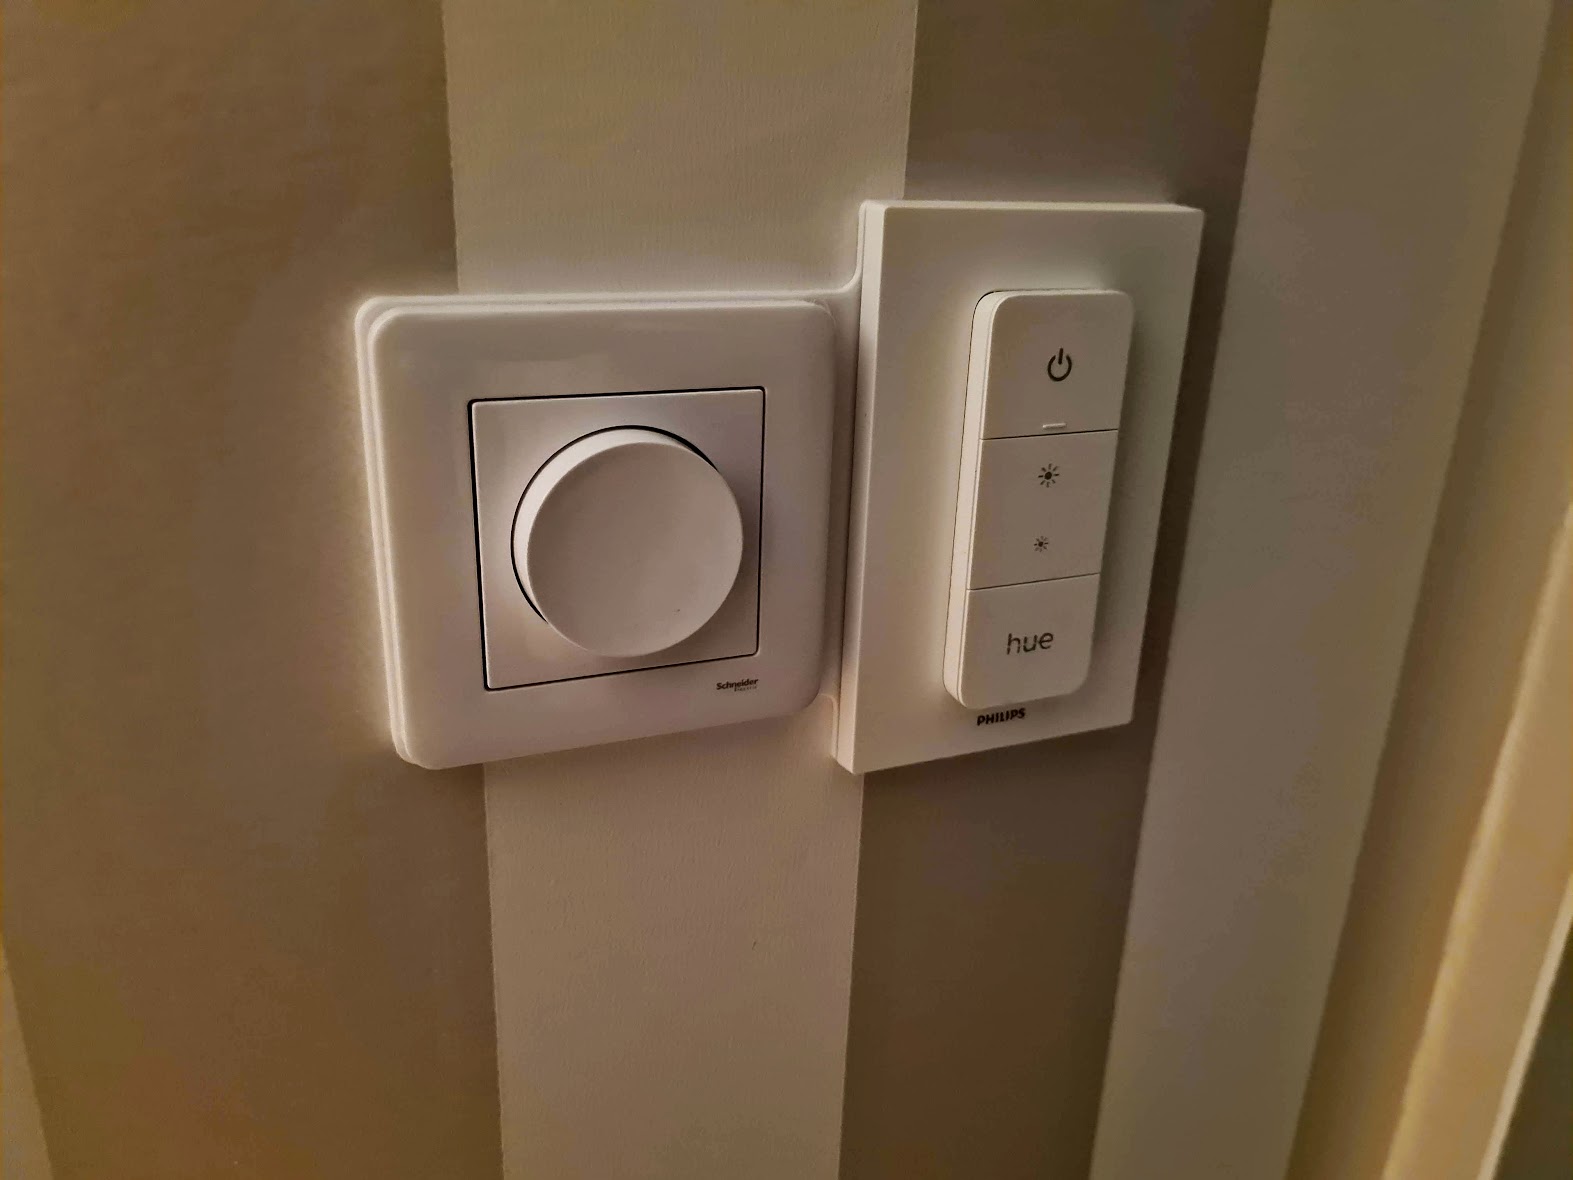 Schneider Exxact + Philips Hue Dimmer Switch (V2) (no drilling/taping!)